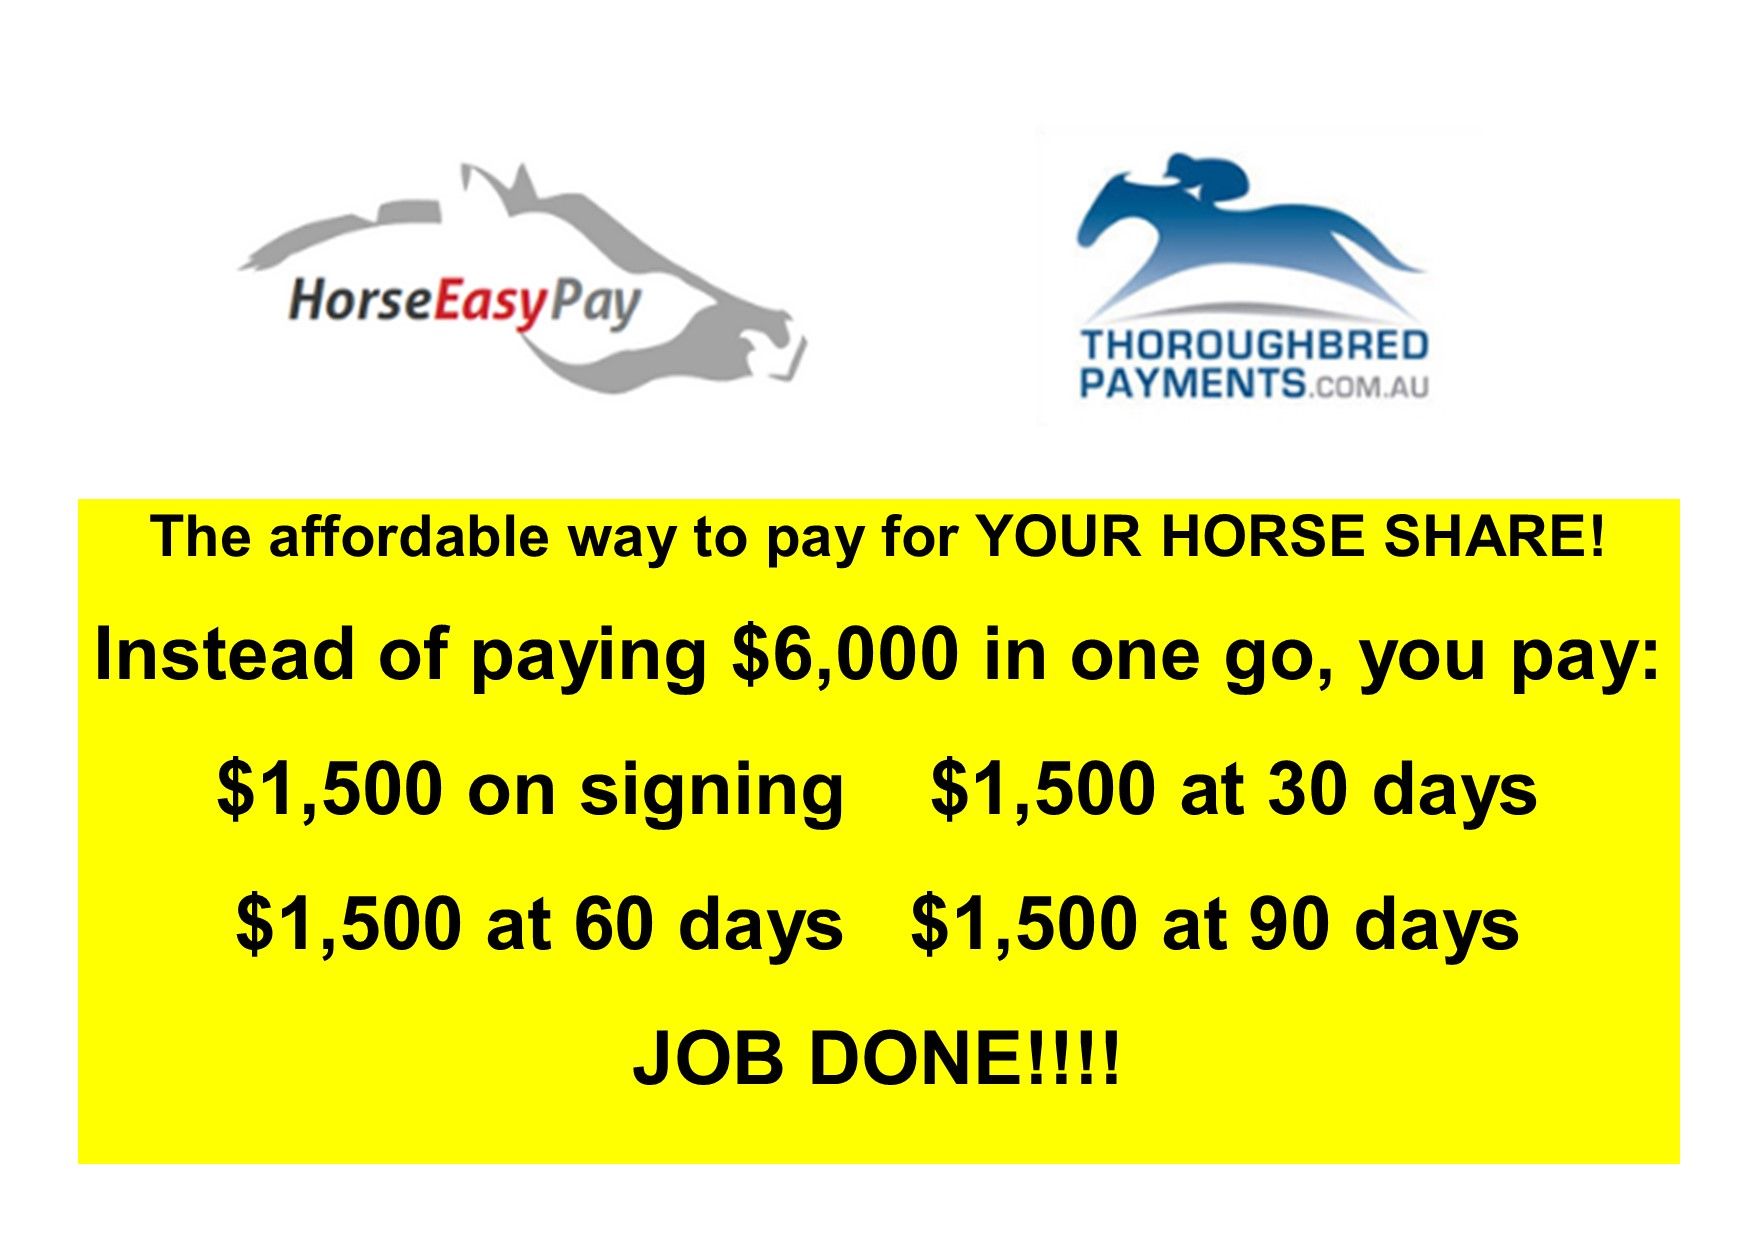 Pay off your Horse Share purchase with HorseEasyPay